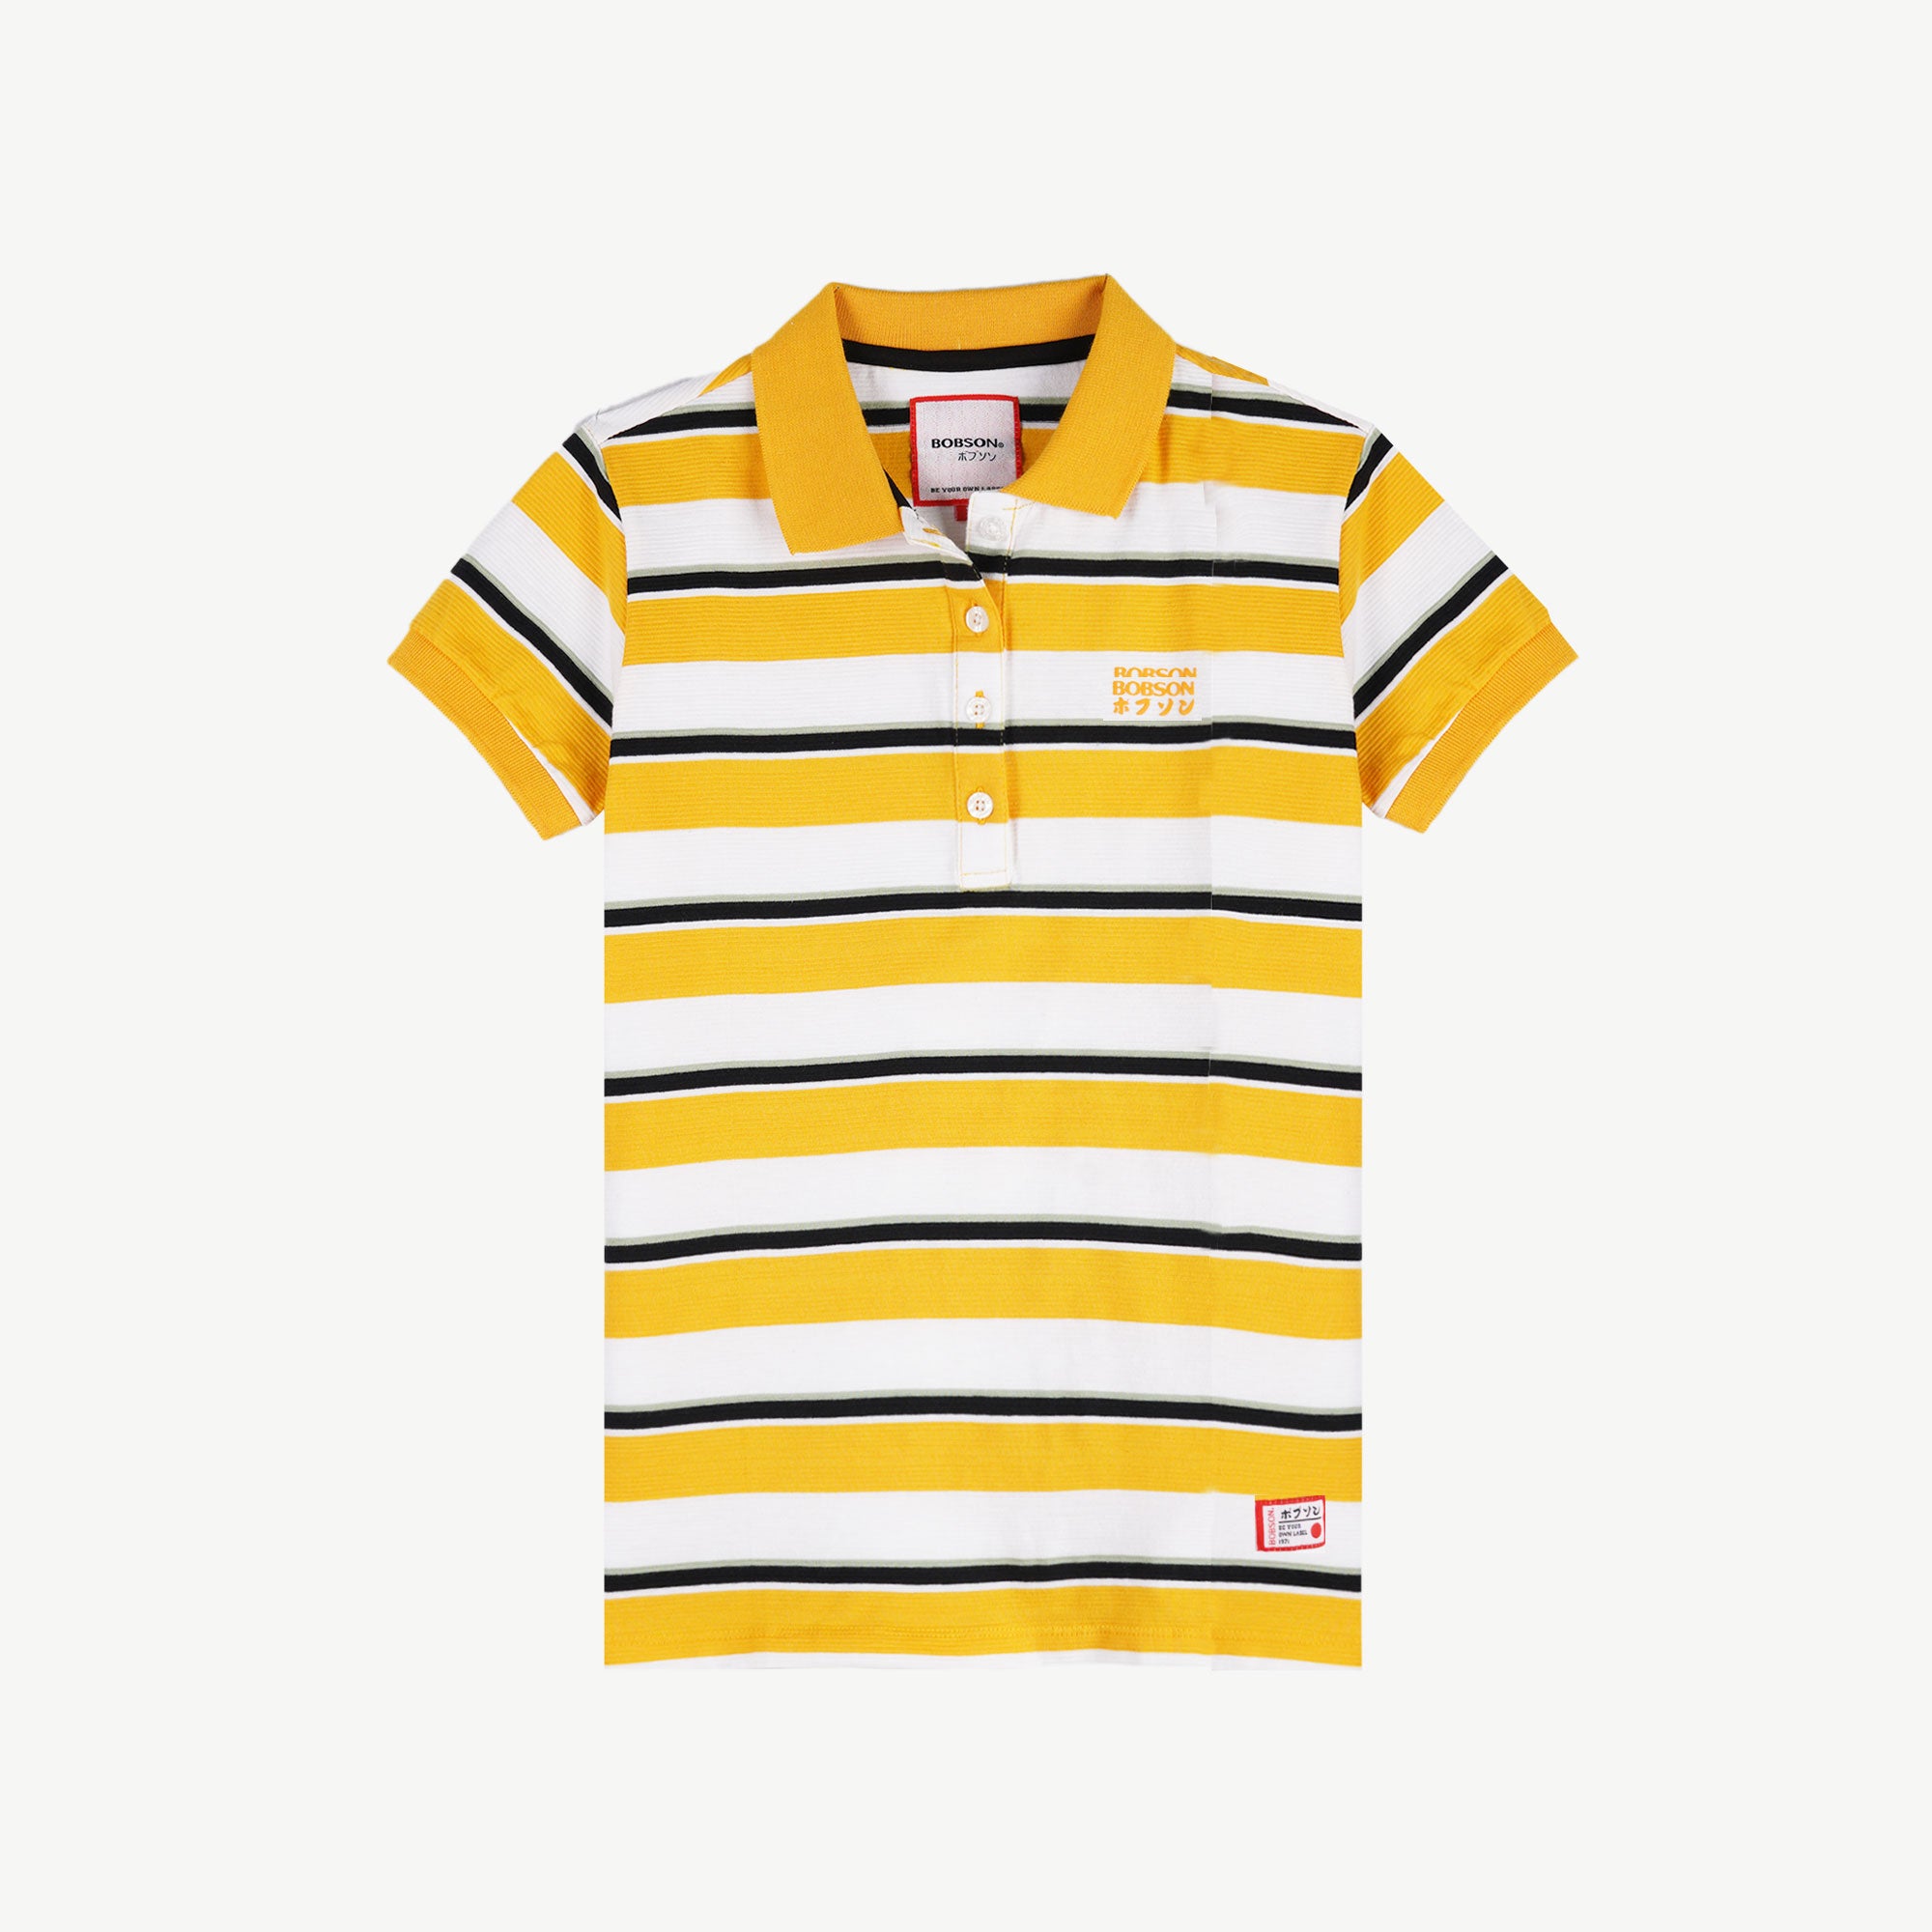 Bobson Japanese Ladies Basic Striped Polo shirt for Women Missed Lycra Fabric Trendy Fashion High Quality Apparel Comfortable Casual Stretchable Collared shirt for Women Regular Fit 123350 (Yellow Gold)